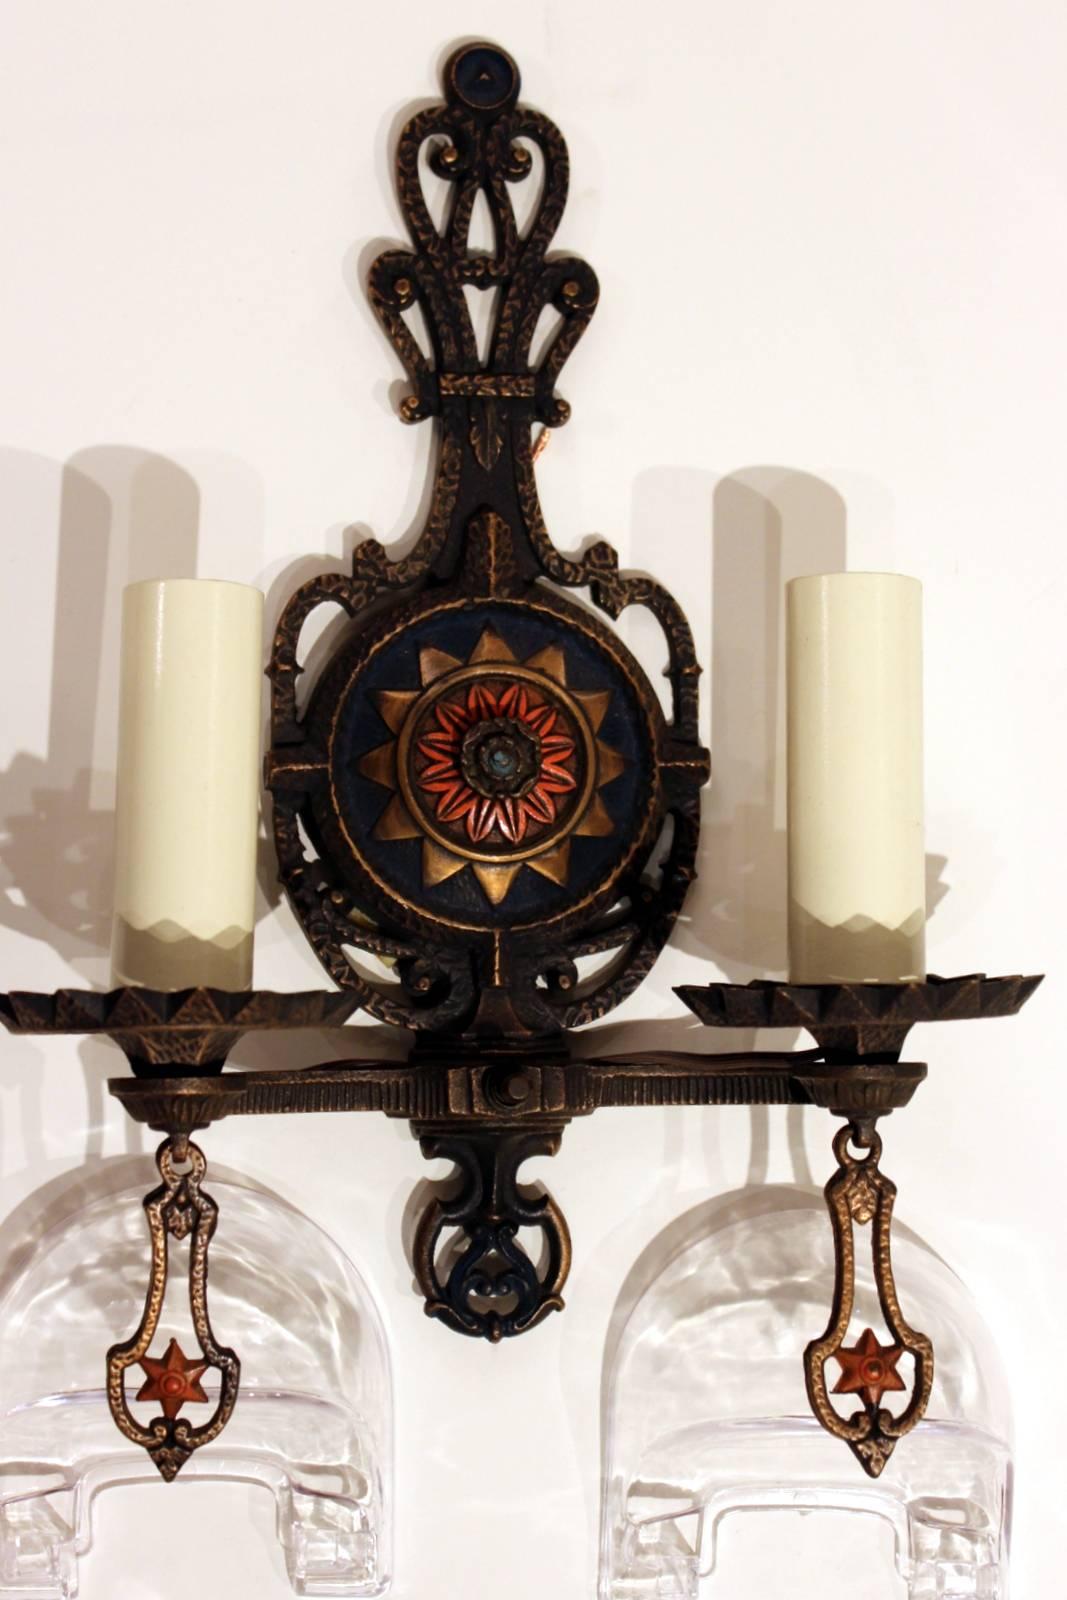 A set of four cast brass patinated and poly chromed two-light wall sconces. These have all the original details with brand new wiring. The sconces have individual on and off switches on each. These are original circa 1910 in great condition with new